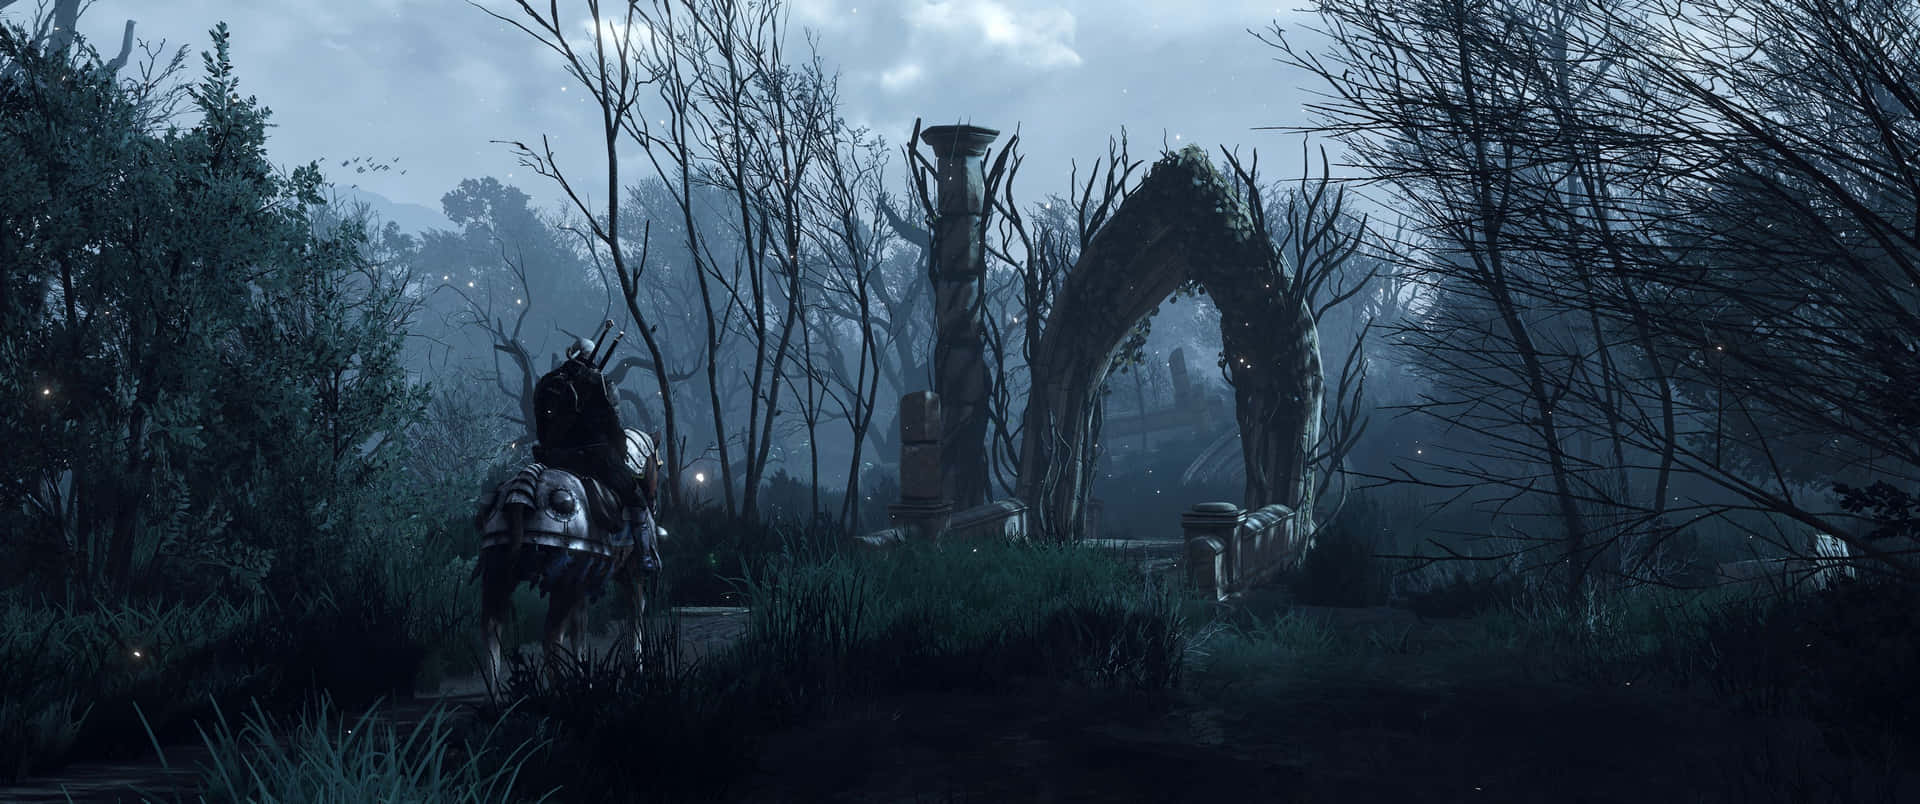 3440x1440 Spil The Witcher Tapet: Wallpaper